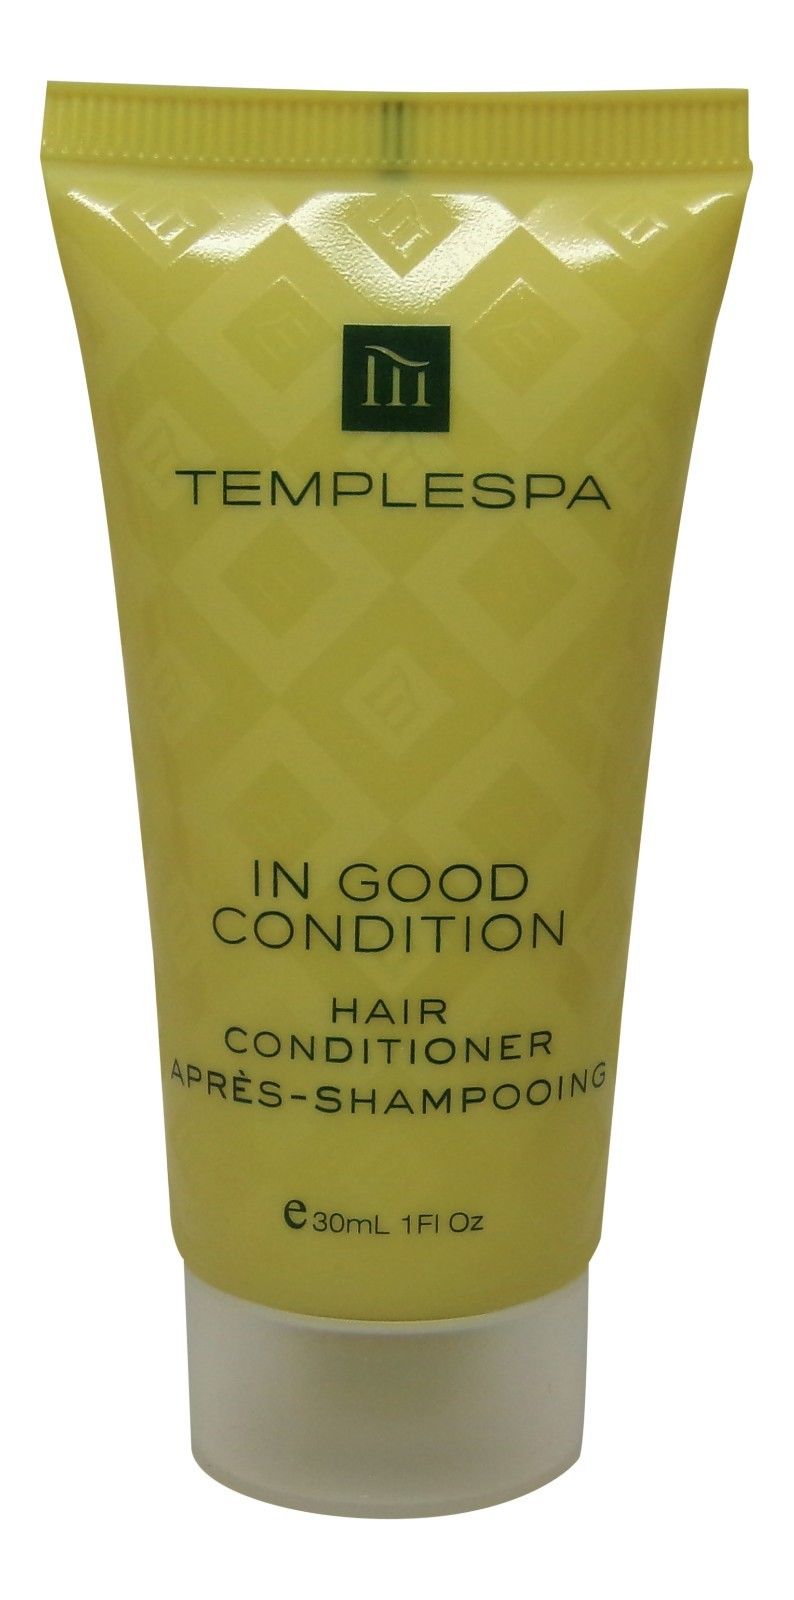 Temple Spa In Good Condition Hair Conditioner 8 each 1oz tubes. Total of 8oz